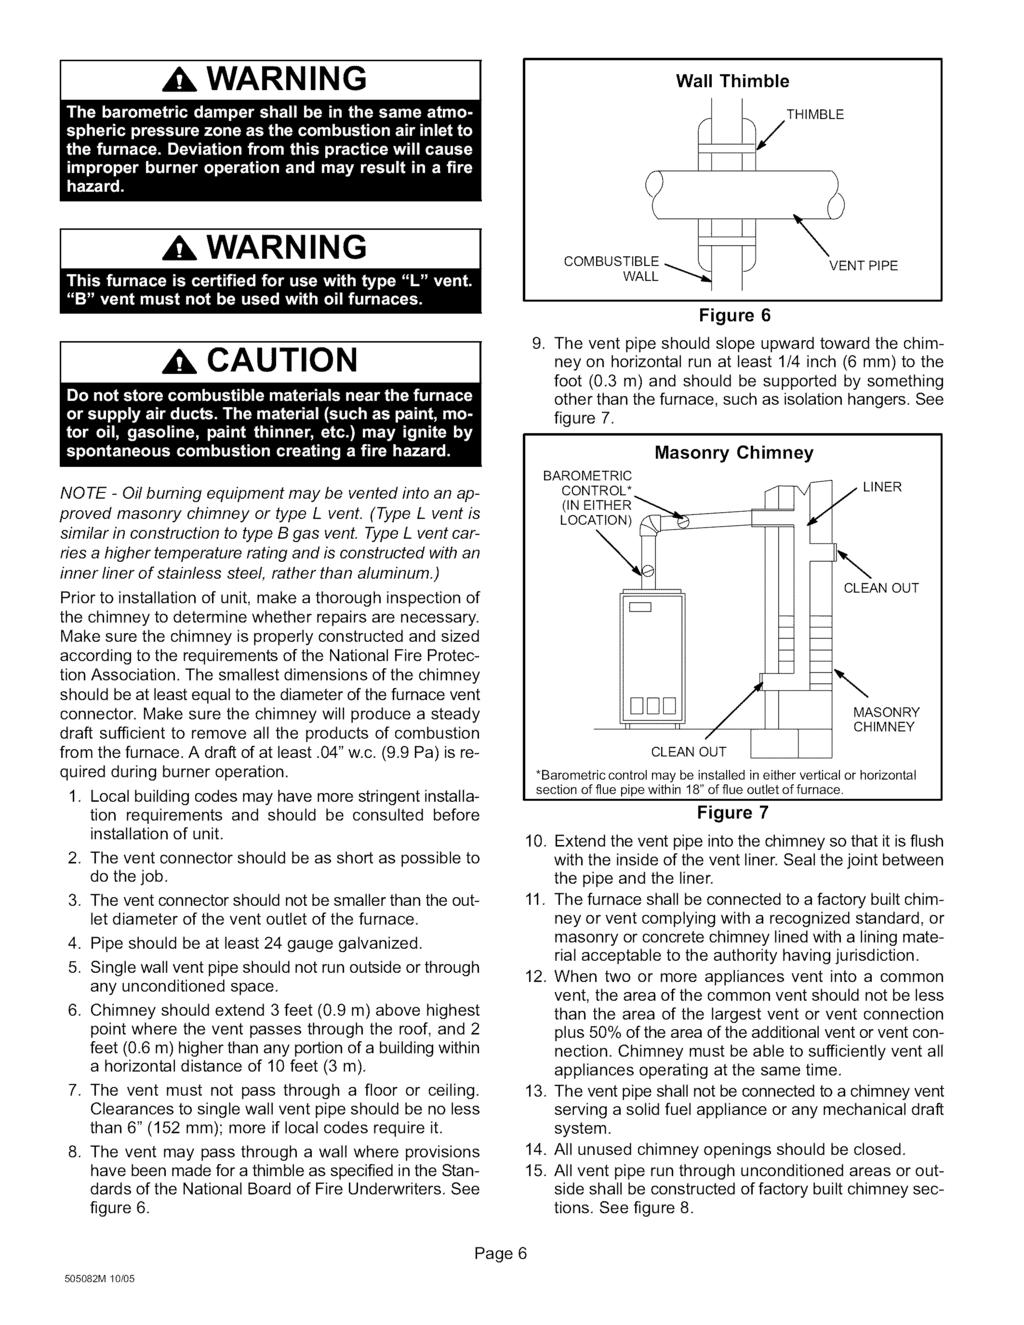 A, WARNING I Wall Thimble A WARNING CAUTION COMBUSTIBLE VENT PIPE WALL Figure 6 9. The vent pipe should slope upward toward the chimney on horizontal run at least 1/4 inch (6 mm) to the foot (0.